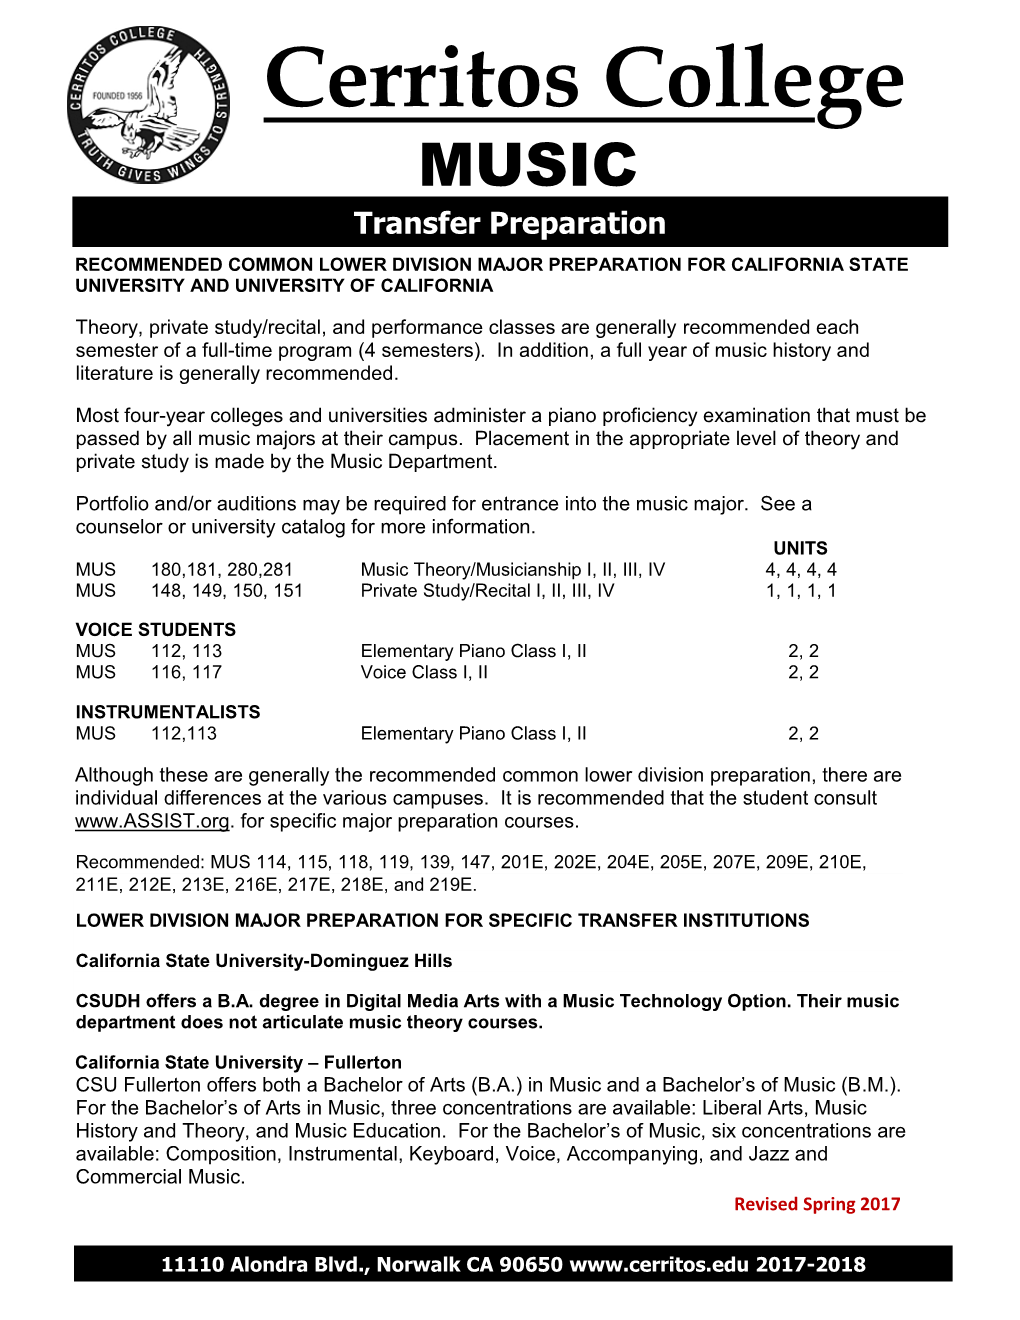 MUSIC Transfer Preparation RECOMMENDED COMMON LOWER DIVISION MAJOR PREPARATION for CALIFORNIA STATE UNIVERSITY and UNIVERSITY of CALIFORNIA